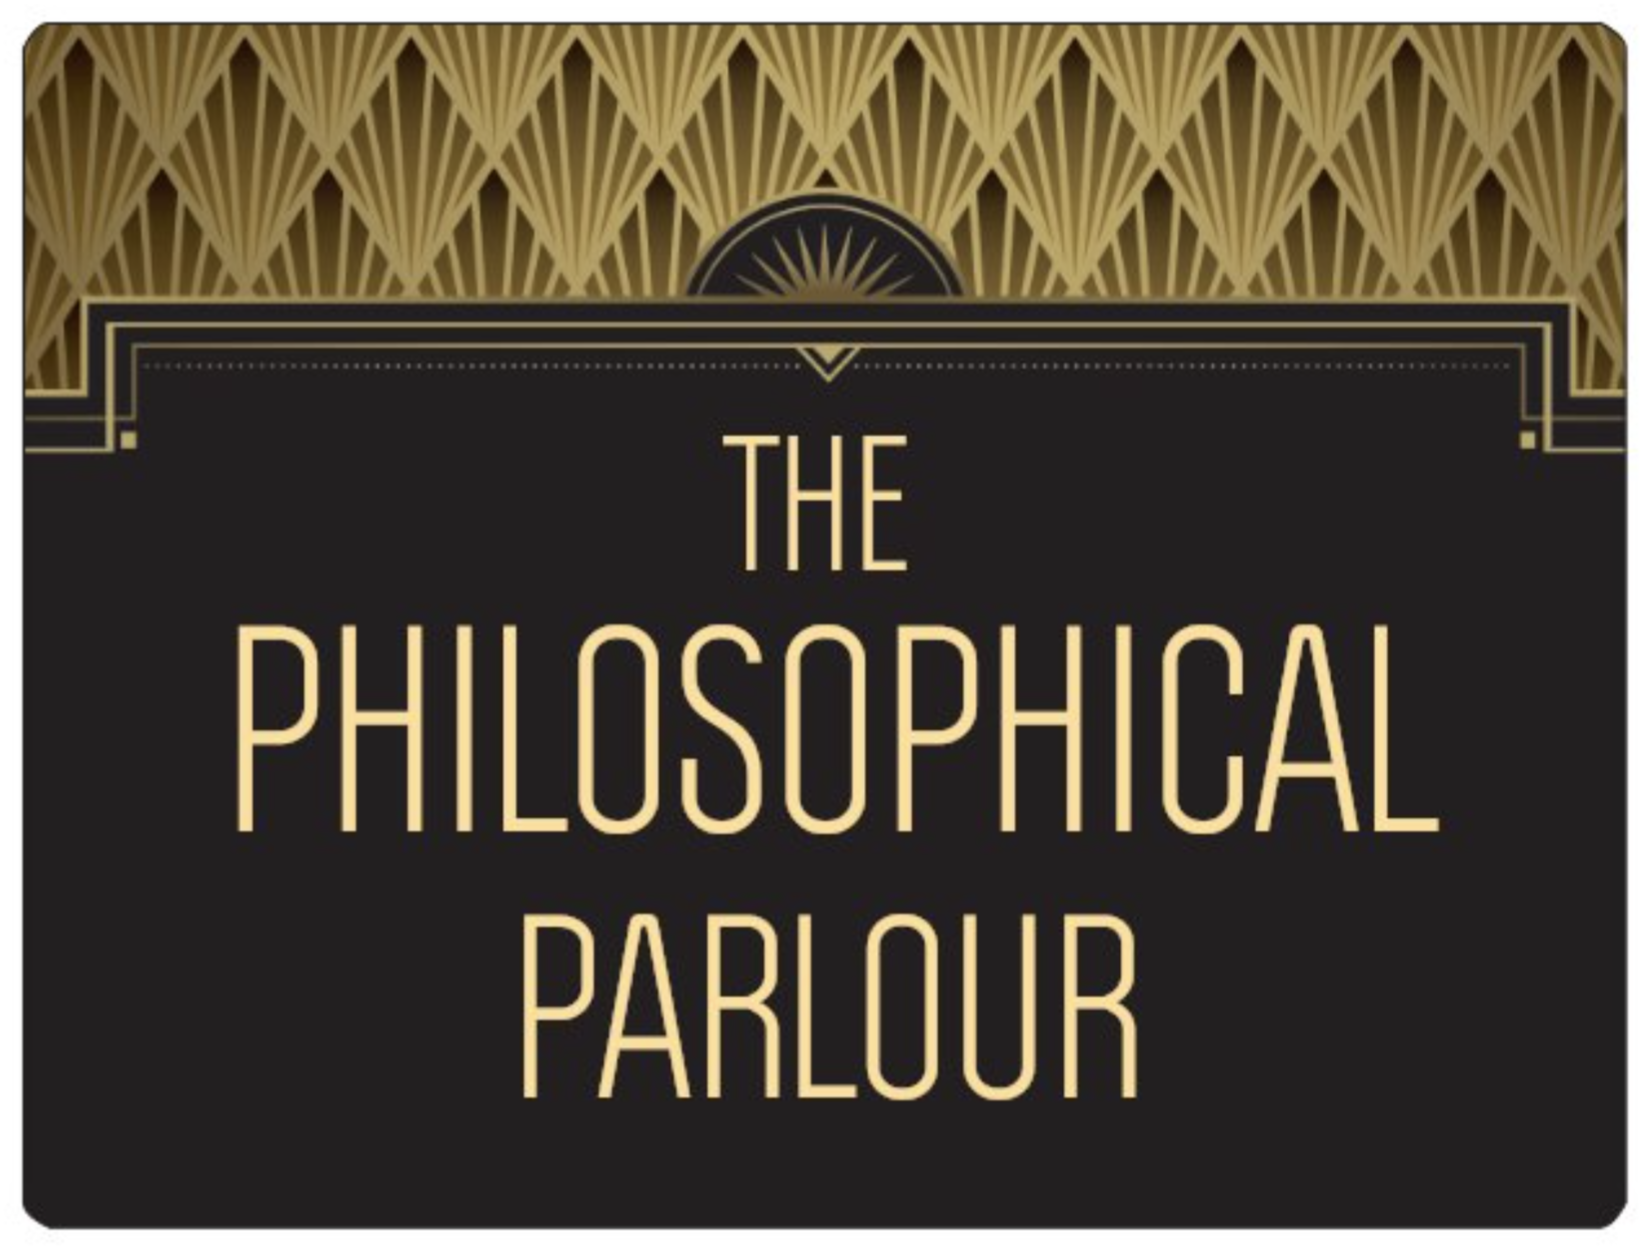 Philosophical Parlour Sign.png